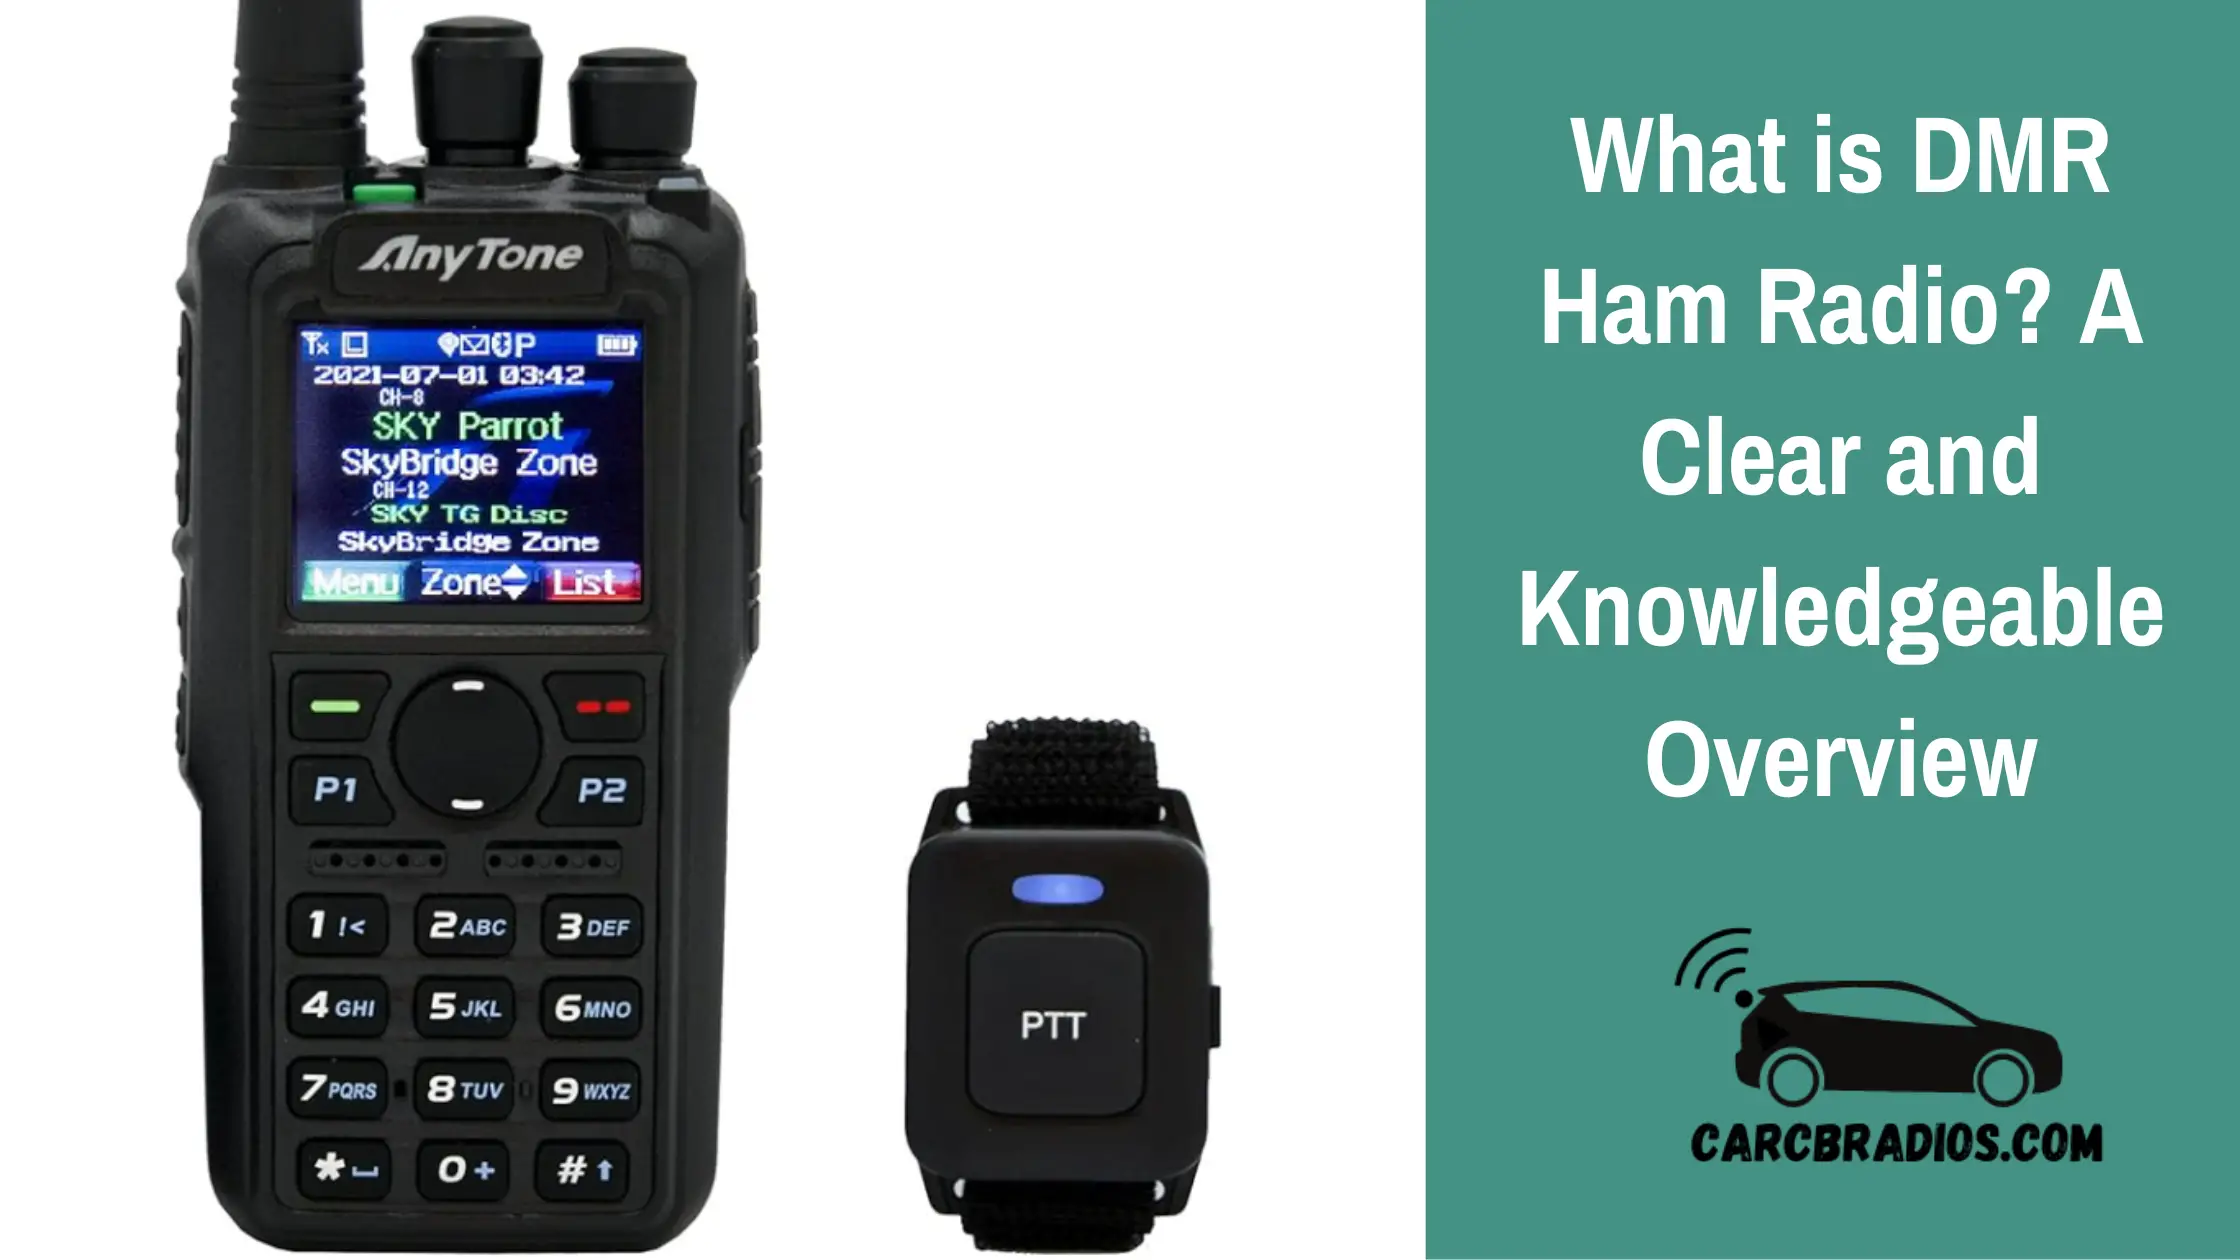 I will explain what DMR ham radio is and why it is becoming so popular among amateur radio enthusiasts. I will also cover the different tiers of DMR, the advantages of DMR, and some common DMR jargon.